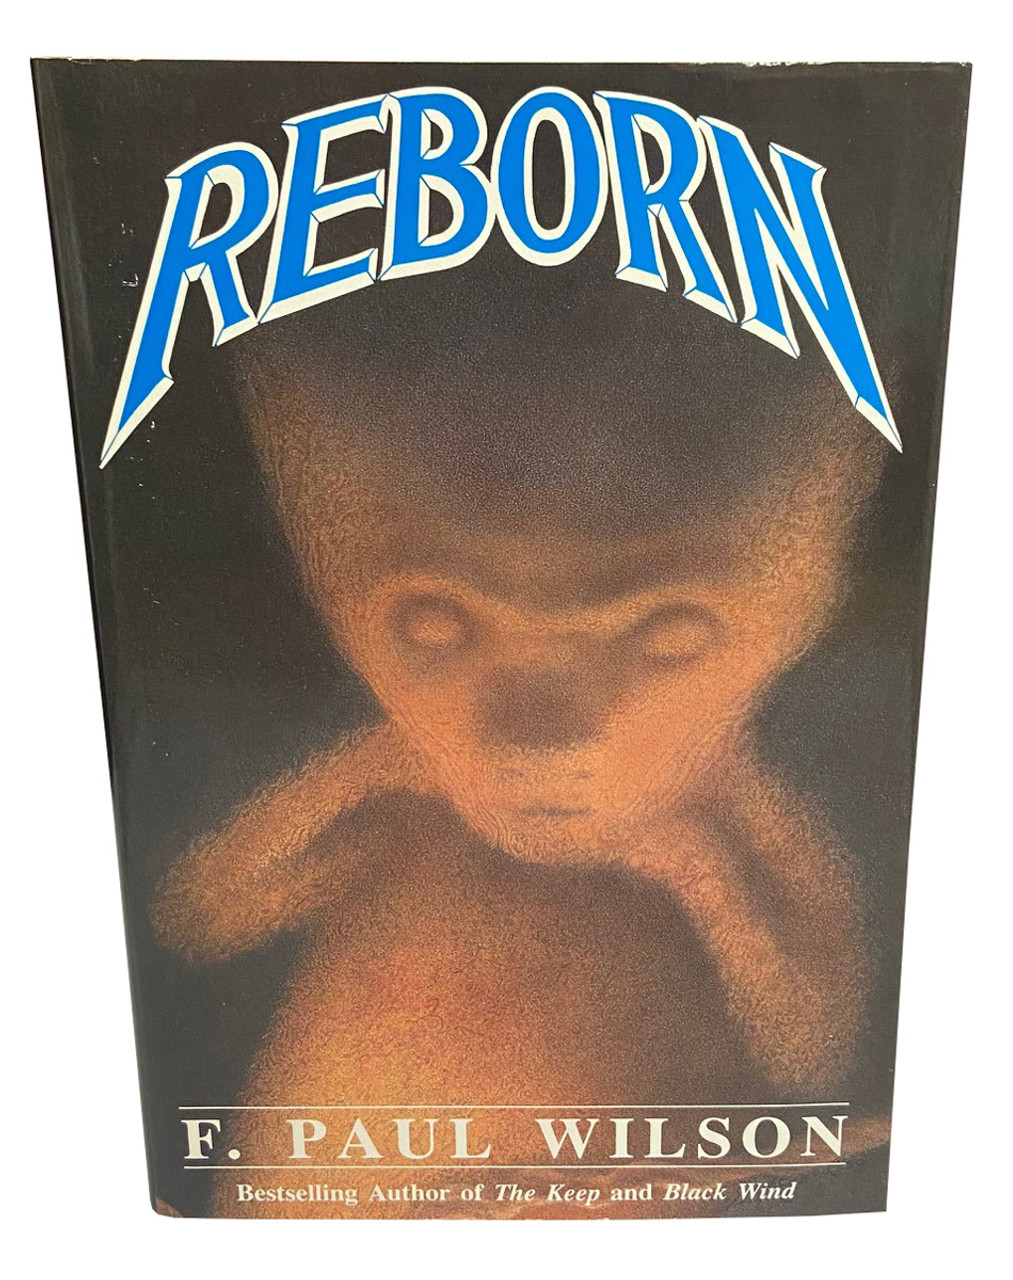 F. Paul Wilson "Reborn", "Reprisal", "SIBS", and "Nightworld" Signed Limited Edition 4-Vol. Set